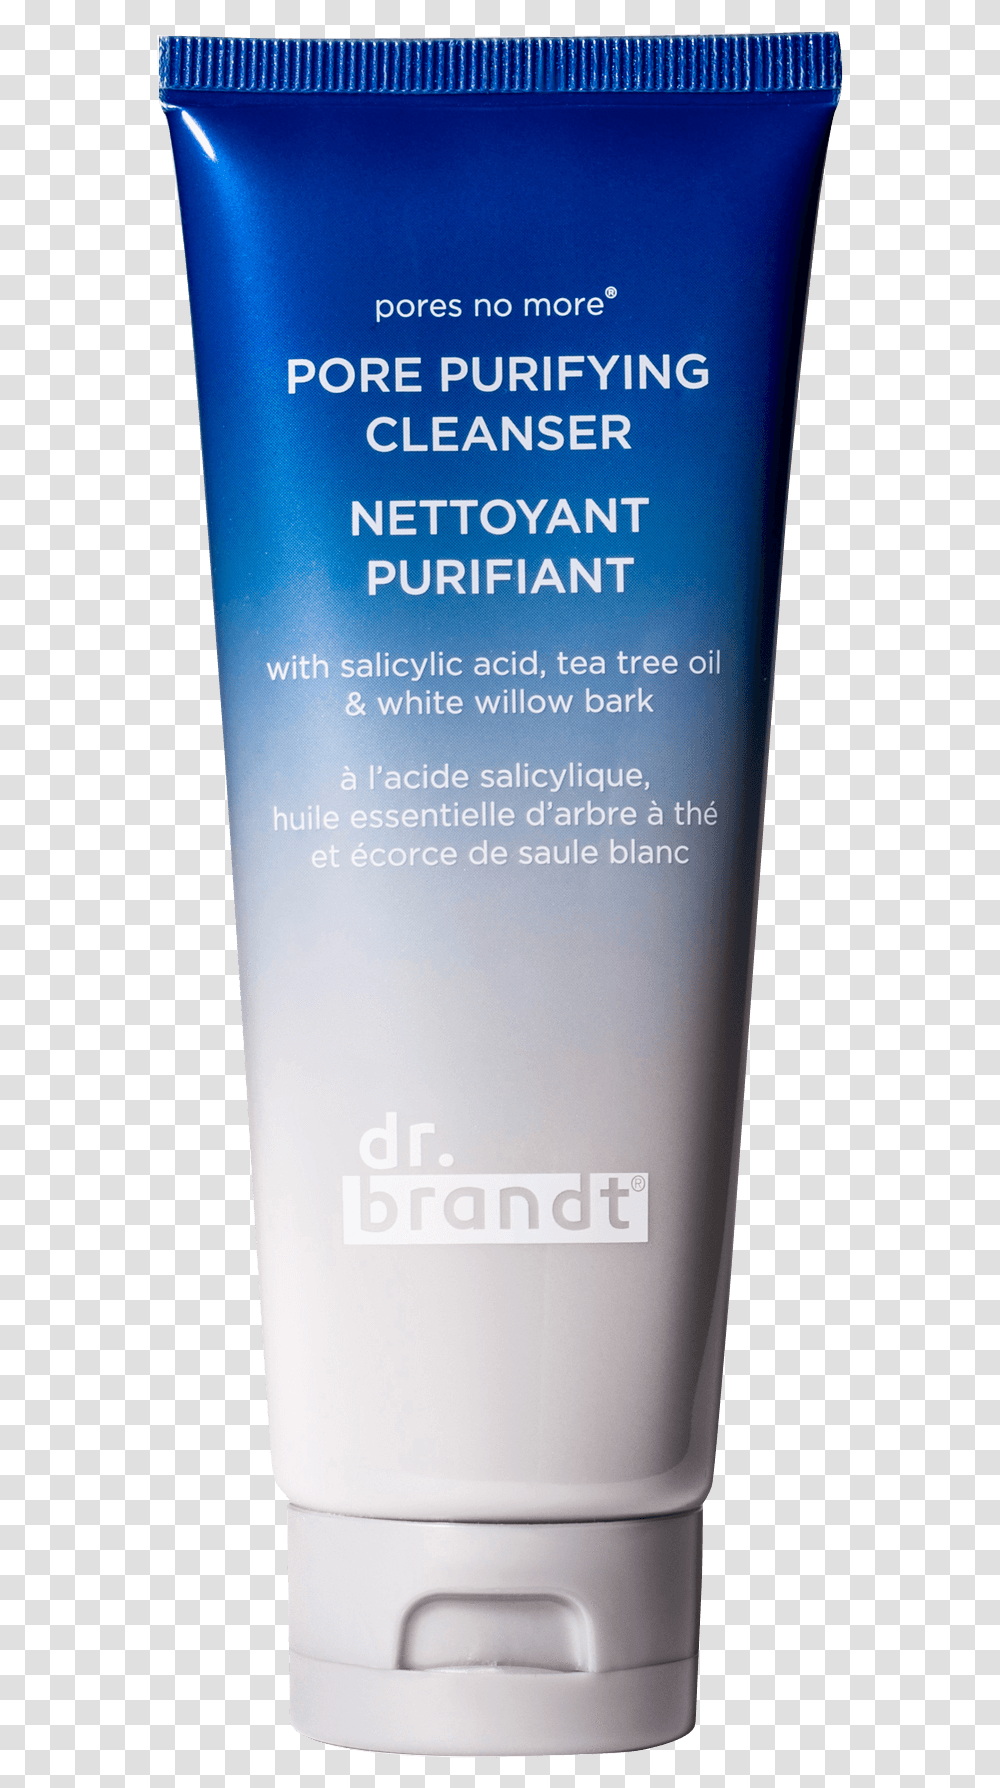 Pores No More Pore Purifying Cleanser, Book, Bottle, Lotion, Cosmetics Transparent Png